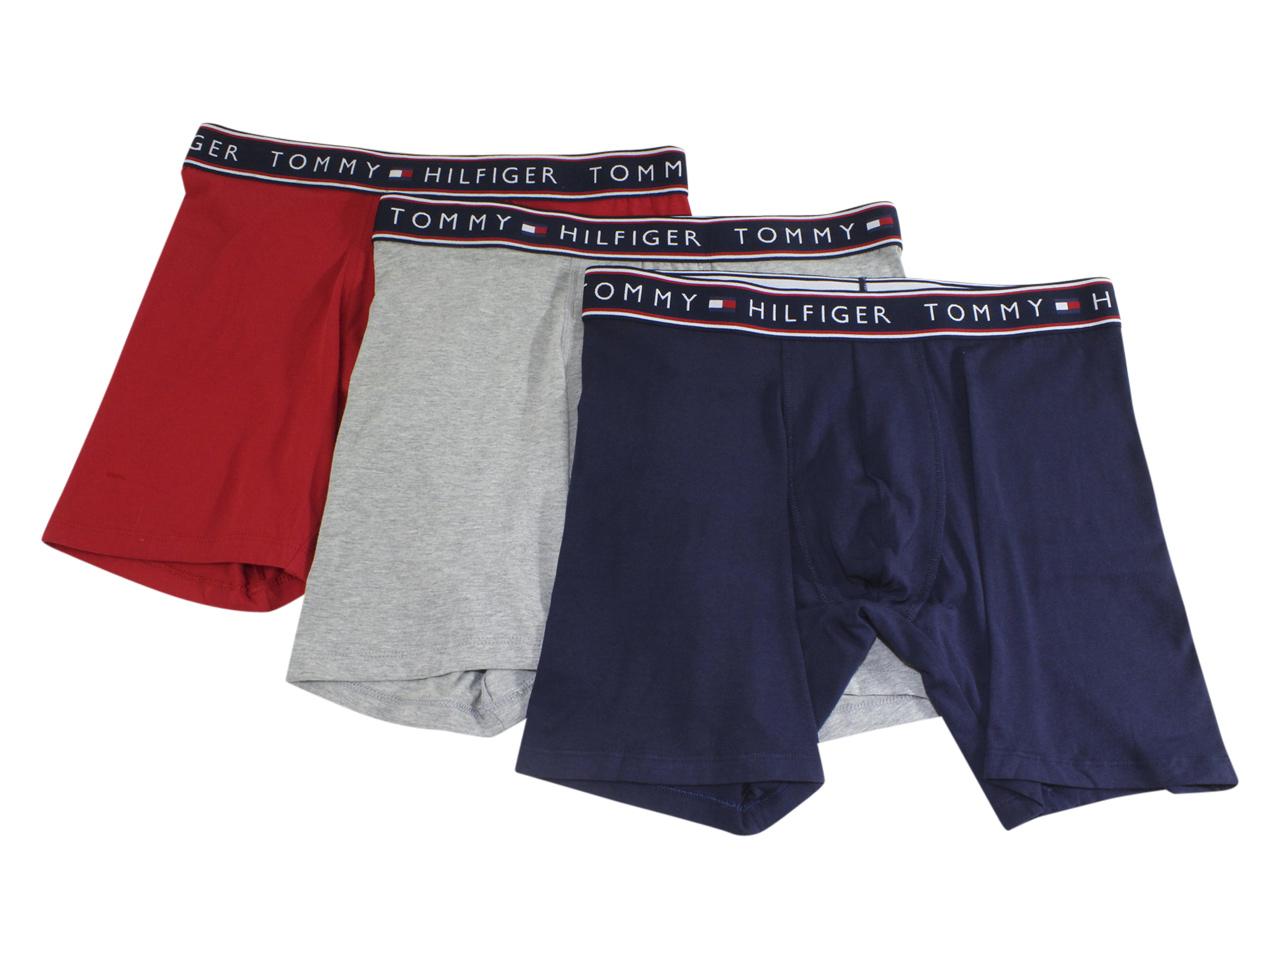 UPC 088541539364 product image for Tommy Hilfiger Men's 3 Pairs Stretch Mahogany Multi Boxer Briefs Underwear Sz: S | upcitemdb.com